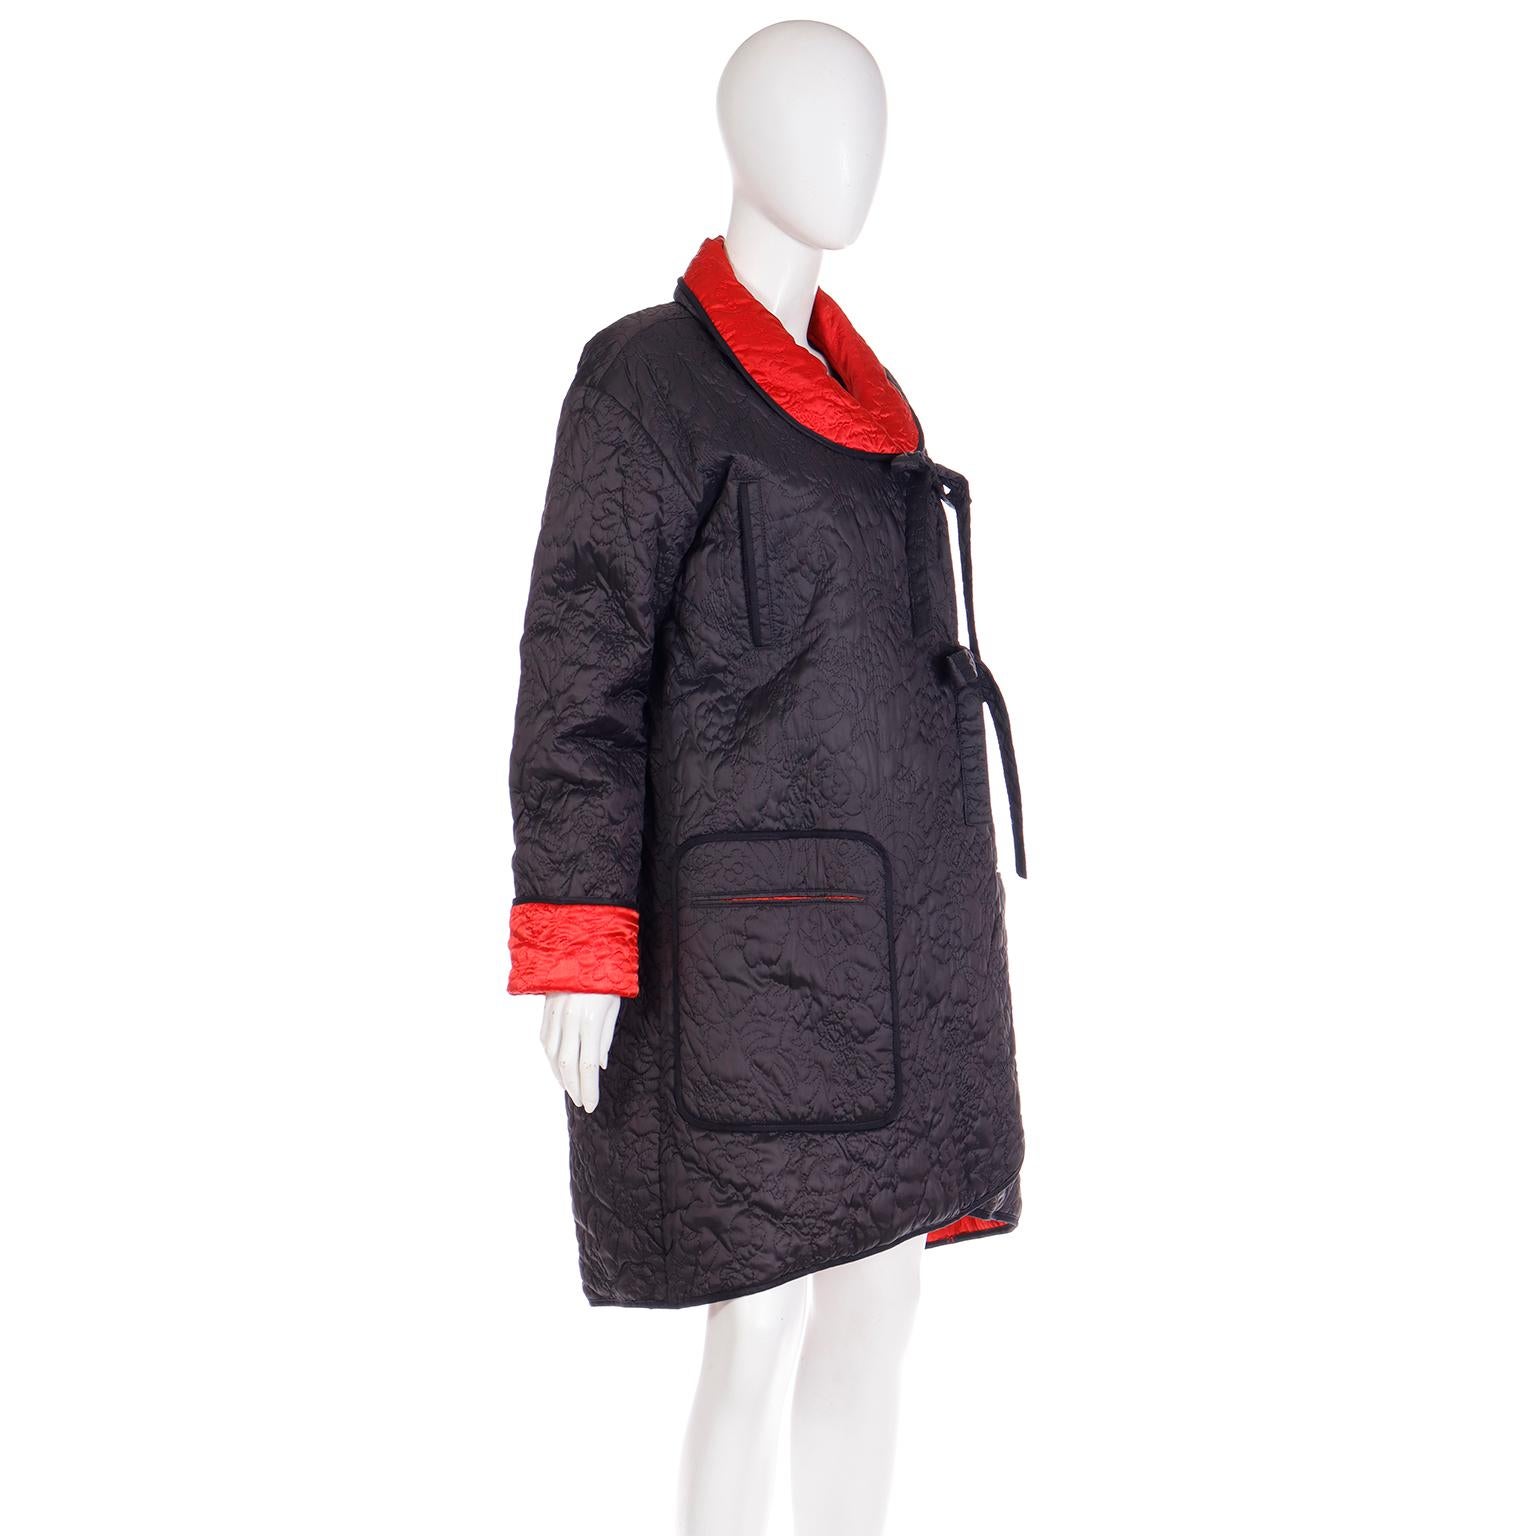 Vintage Sonia Rykiel Quilted Red & Black Reversible Jacket With Hood For Sale 1